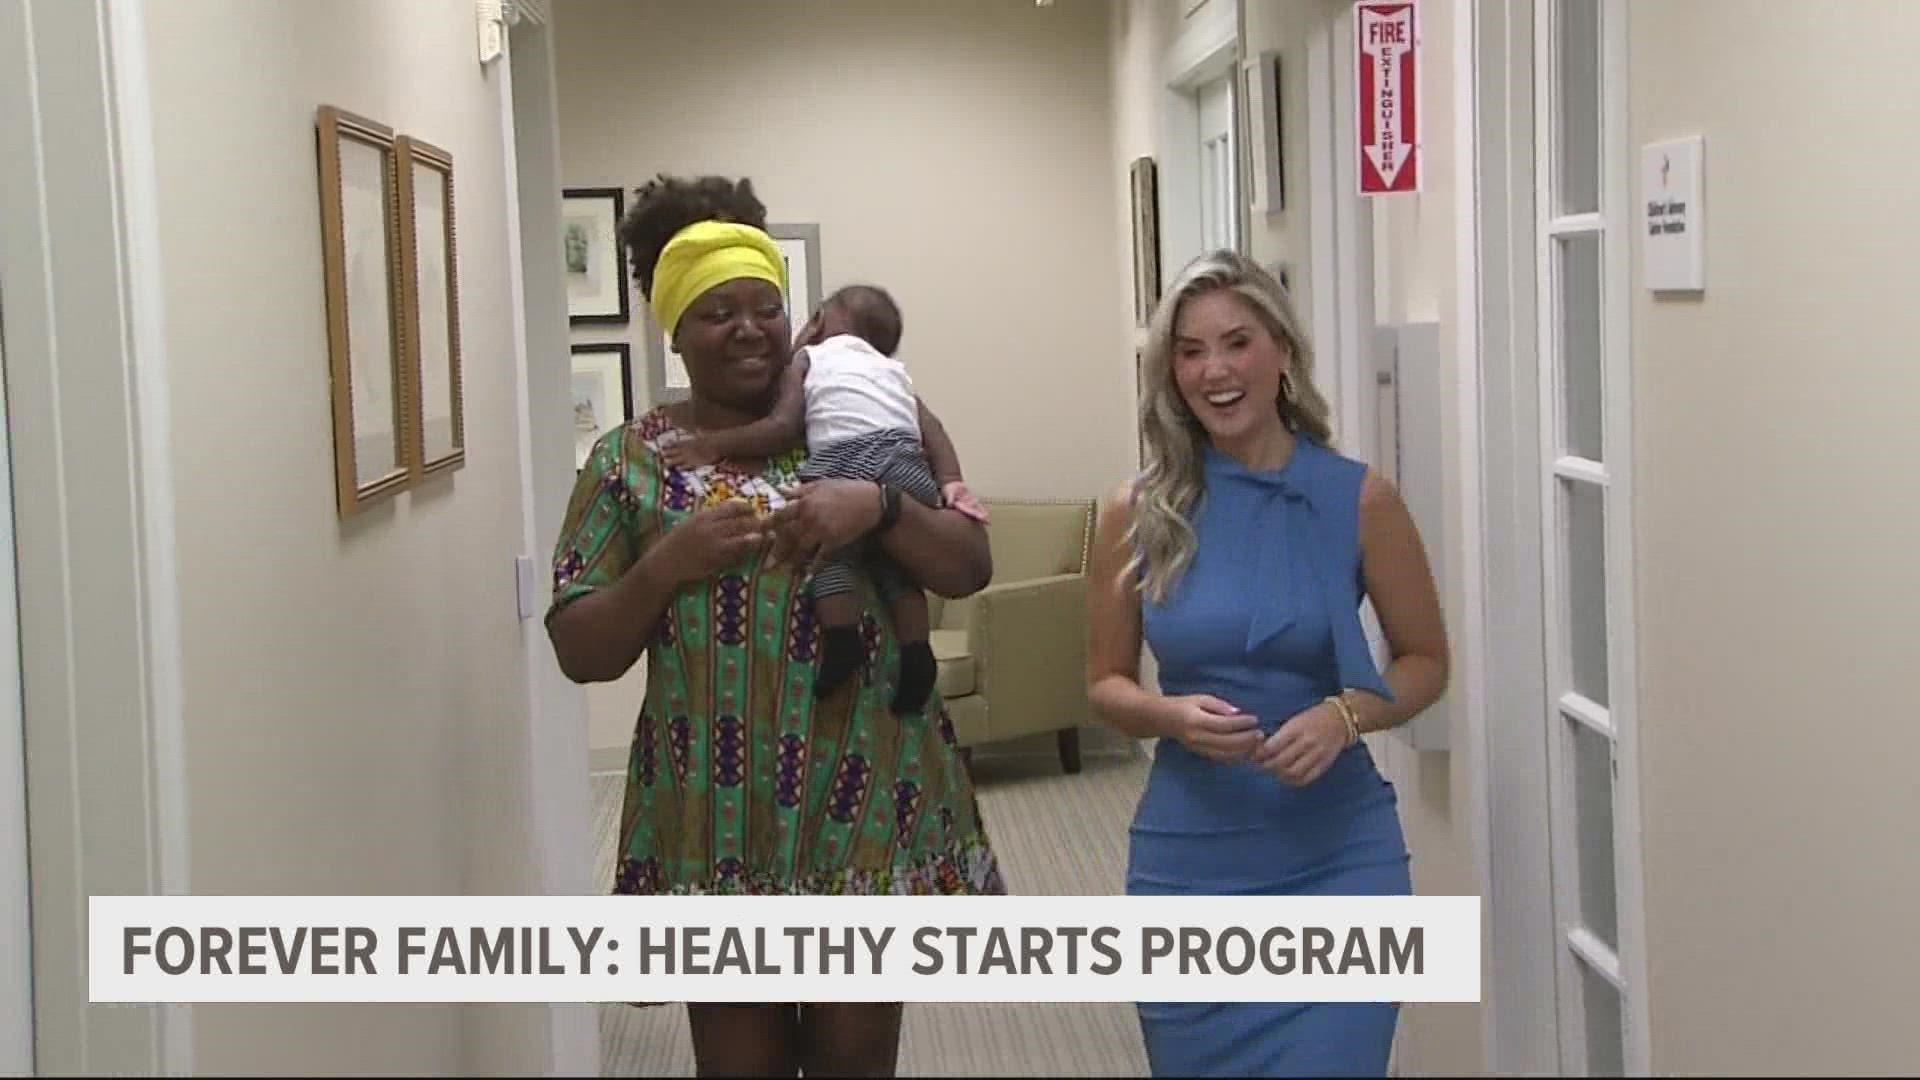 Healthy Starts Under Success 4 Kids and Families helps mothers through pregnancy and during the baby's first year at no cost to parents. Often, when it's most needed